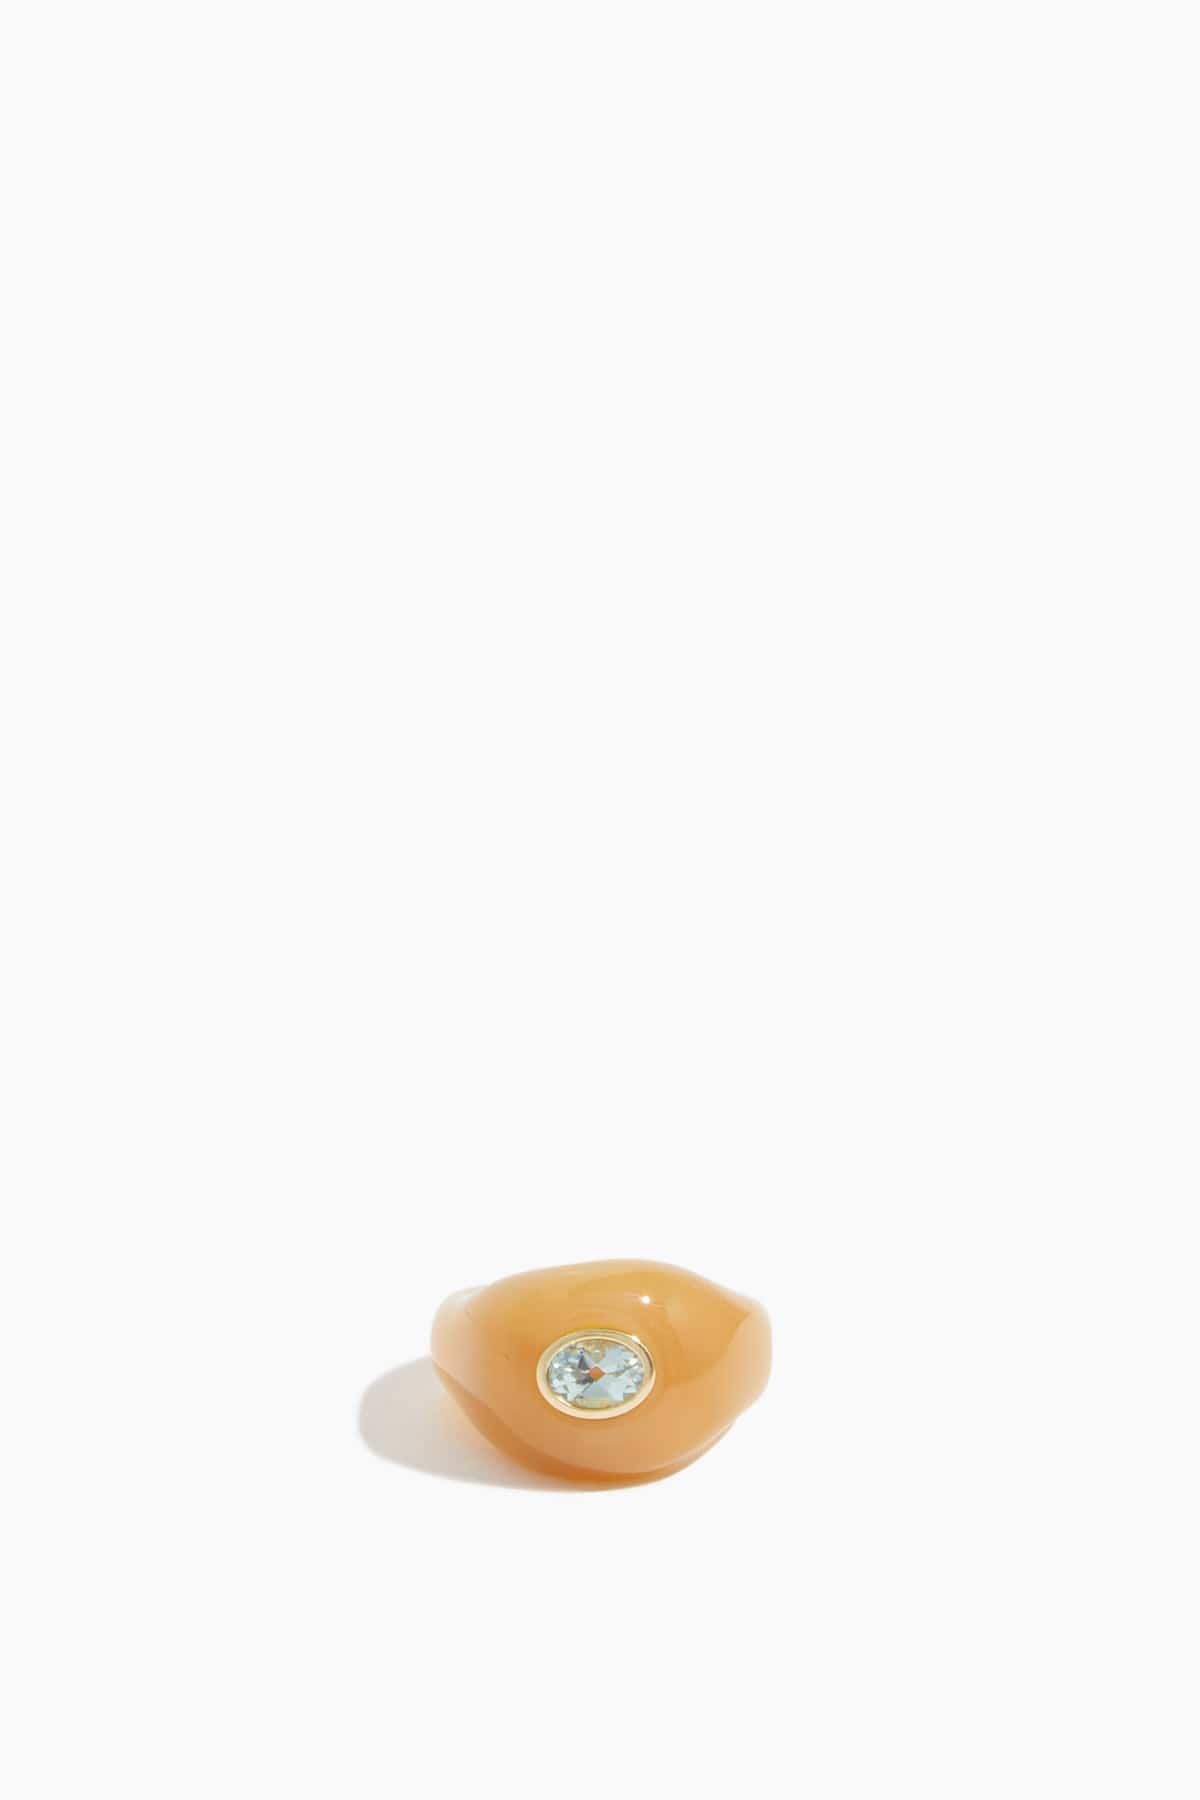 Lizzie Fortunato Rings Monument Ring in Dark Yellow